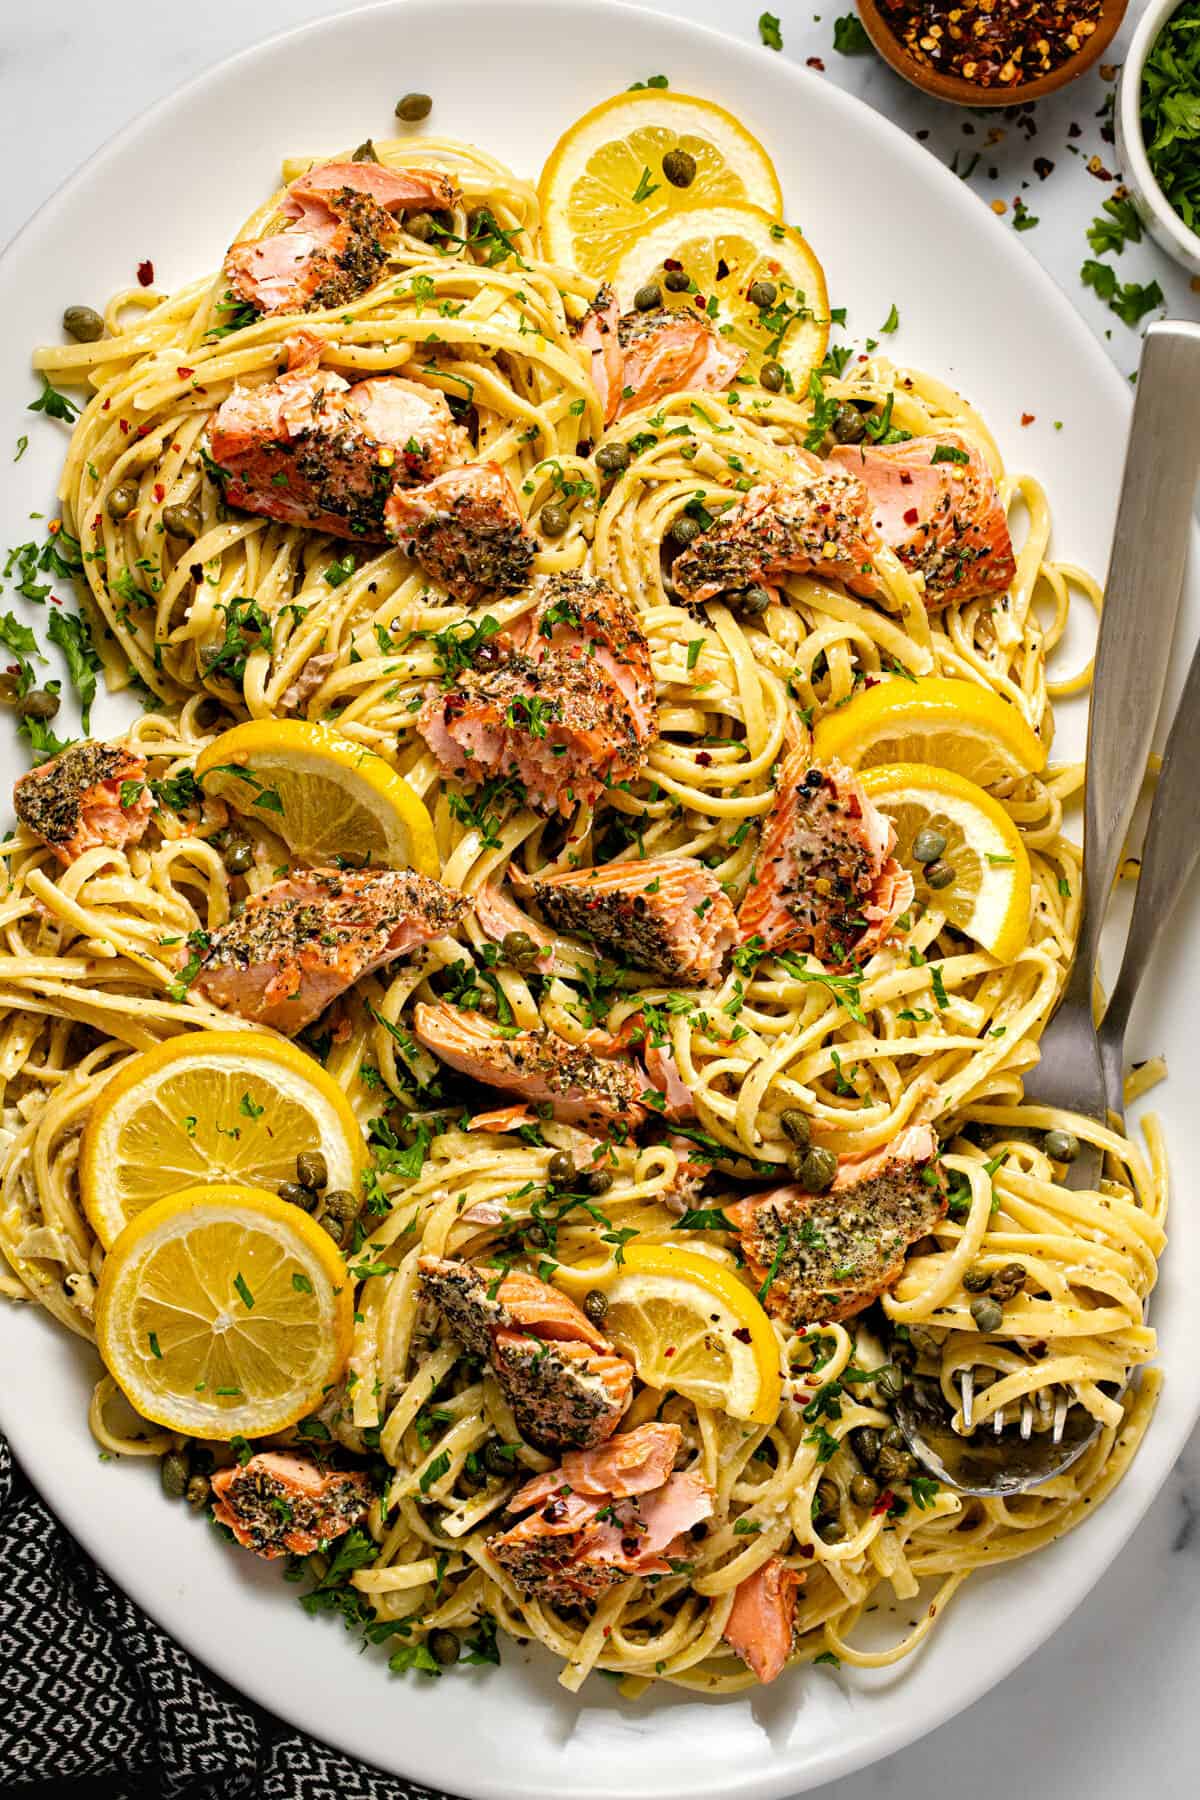 White platter filled with salmon linguine in a garlic herb sauce garnished with parsley.